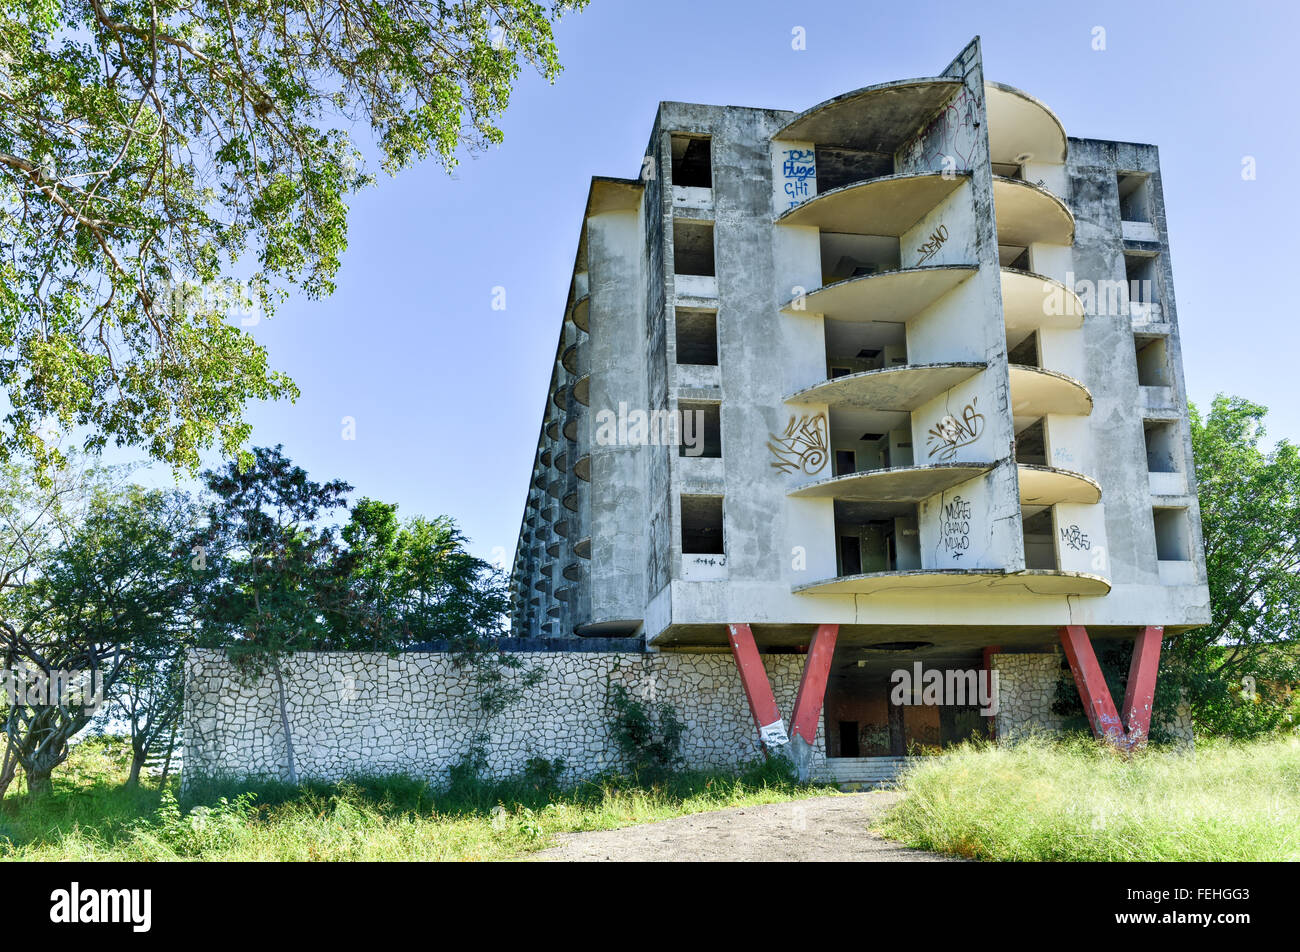 The Hotel Ponce Intercontinental is an abandoned hotel with a still existing structure. The structure, and what it once was, is Stock Photo